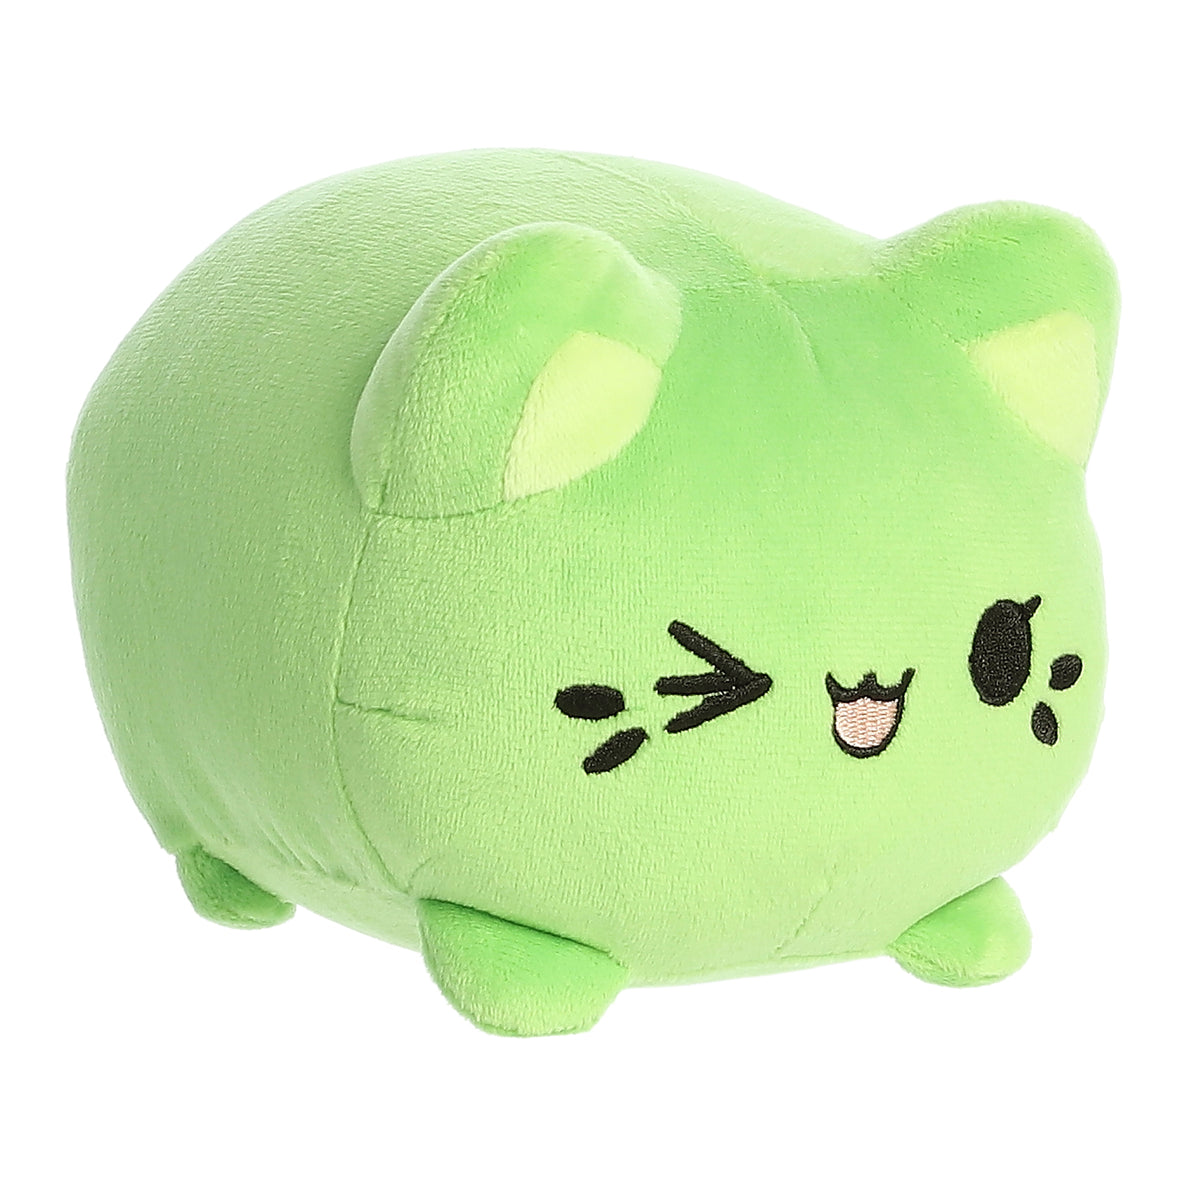 A green Tasty Peach Meowchi plush that is a round cylinder shape with the resemblance of an animated winking cat.